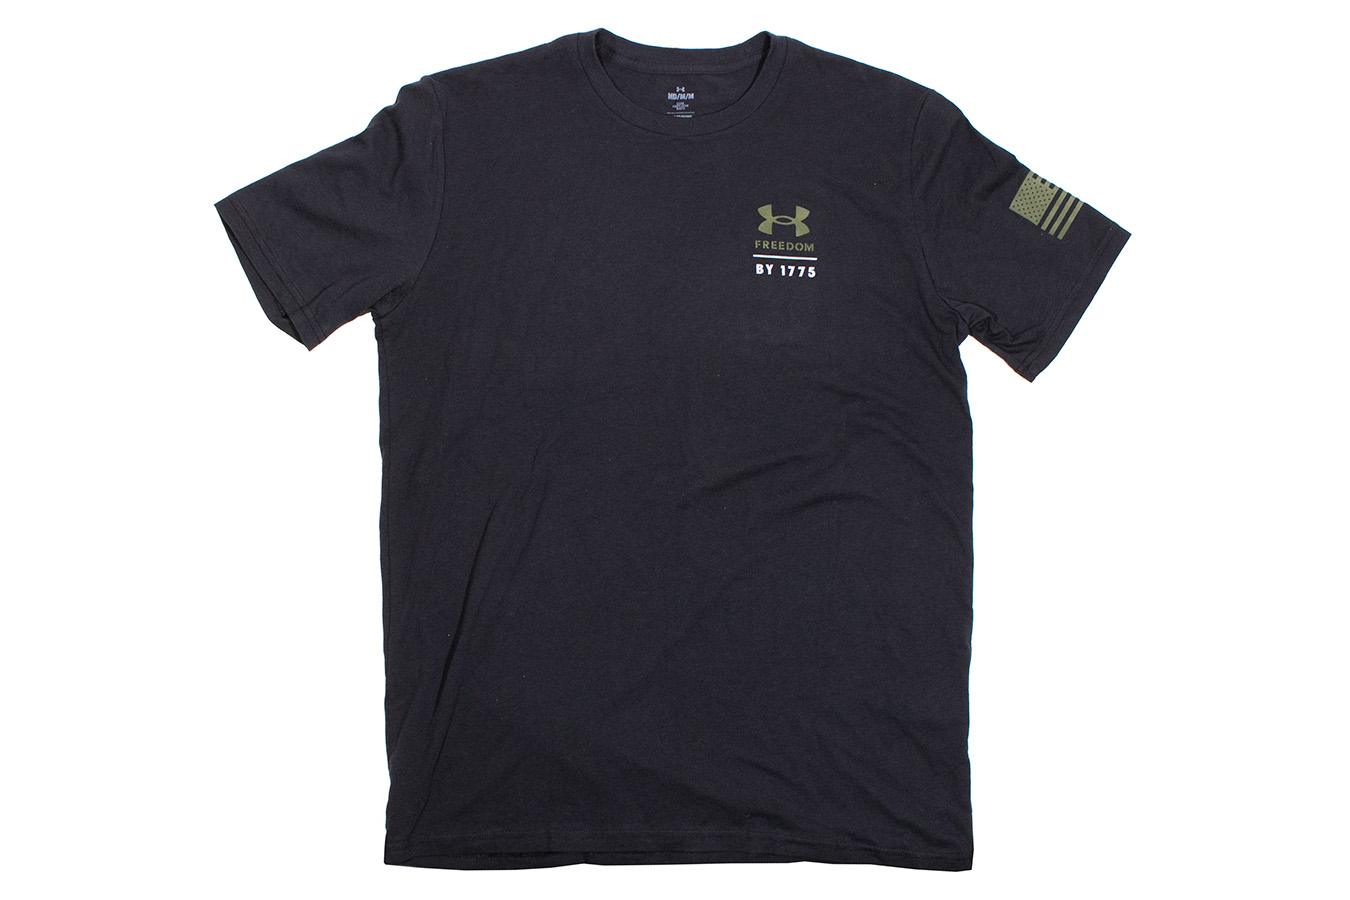 Under Armour Freedom by 1775 Tee | Vance Outdoors